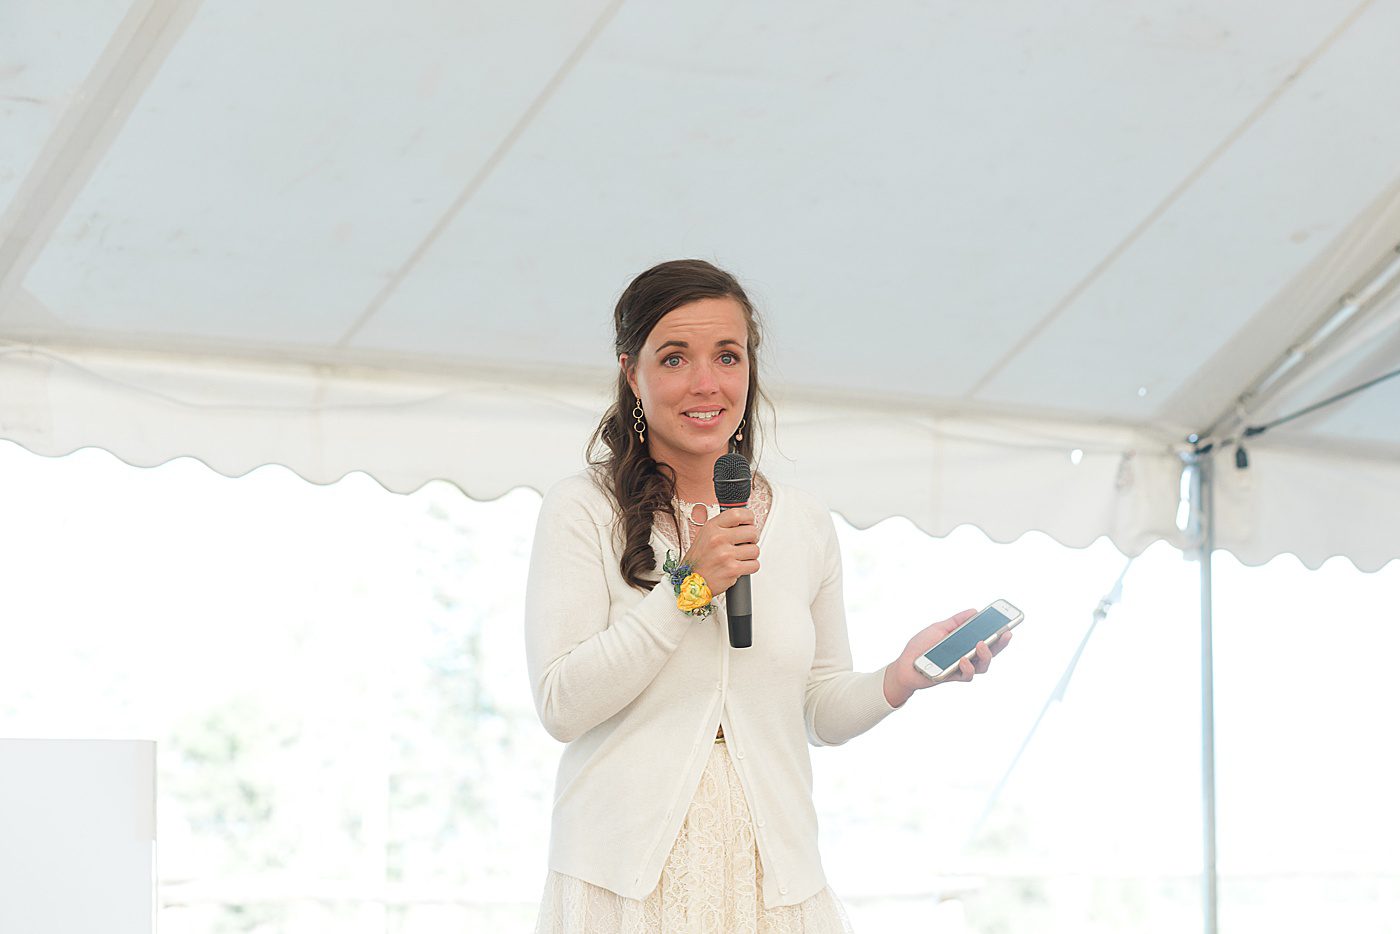 sister giving a wedding speech wearing a floral corsage